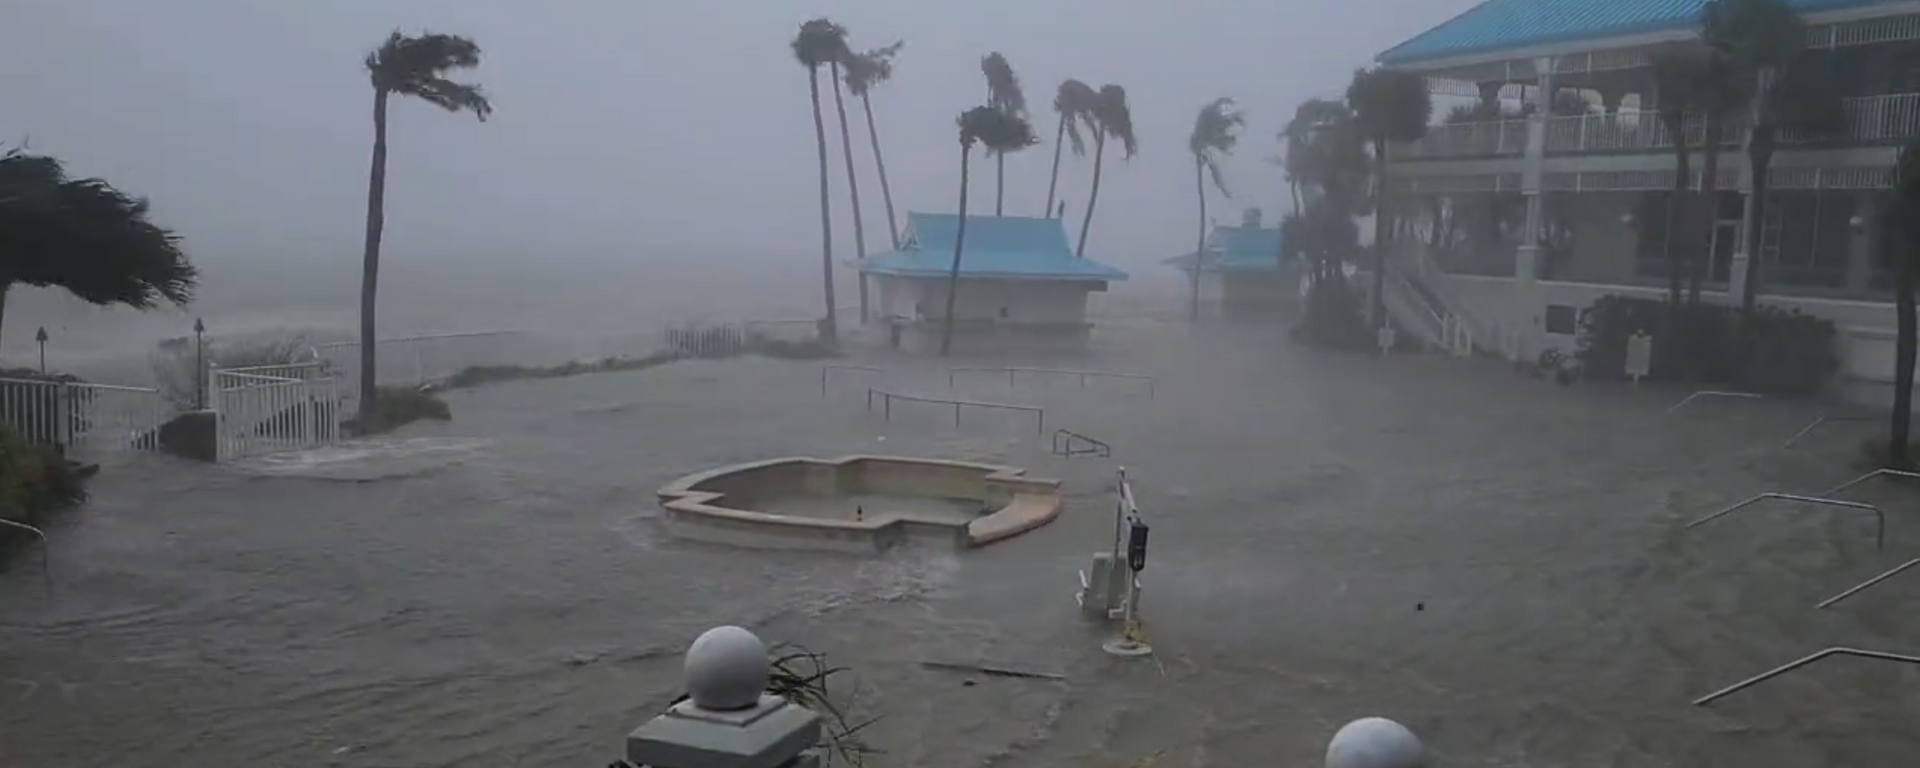 Hurricane Ian has officially made landfall in Florida as a Category 4 storm, the US National Hurricane Center has confirmed. - Sputnik International, 1920, 02.10.2022